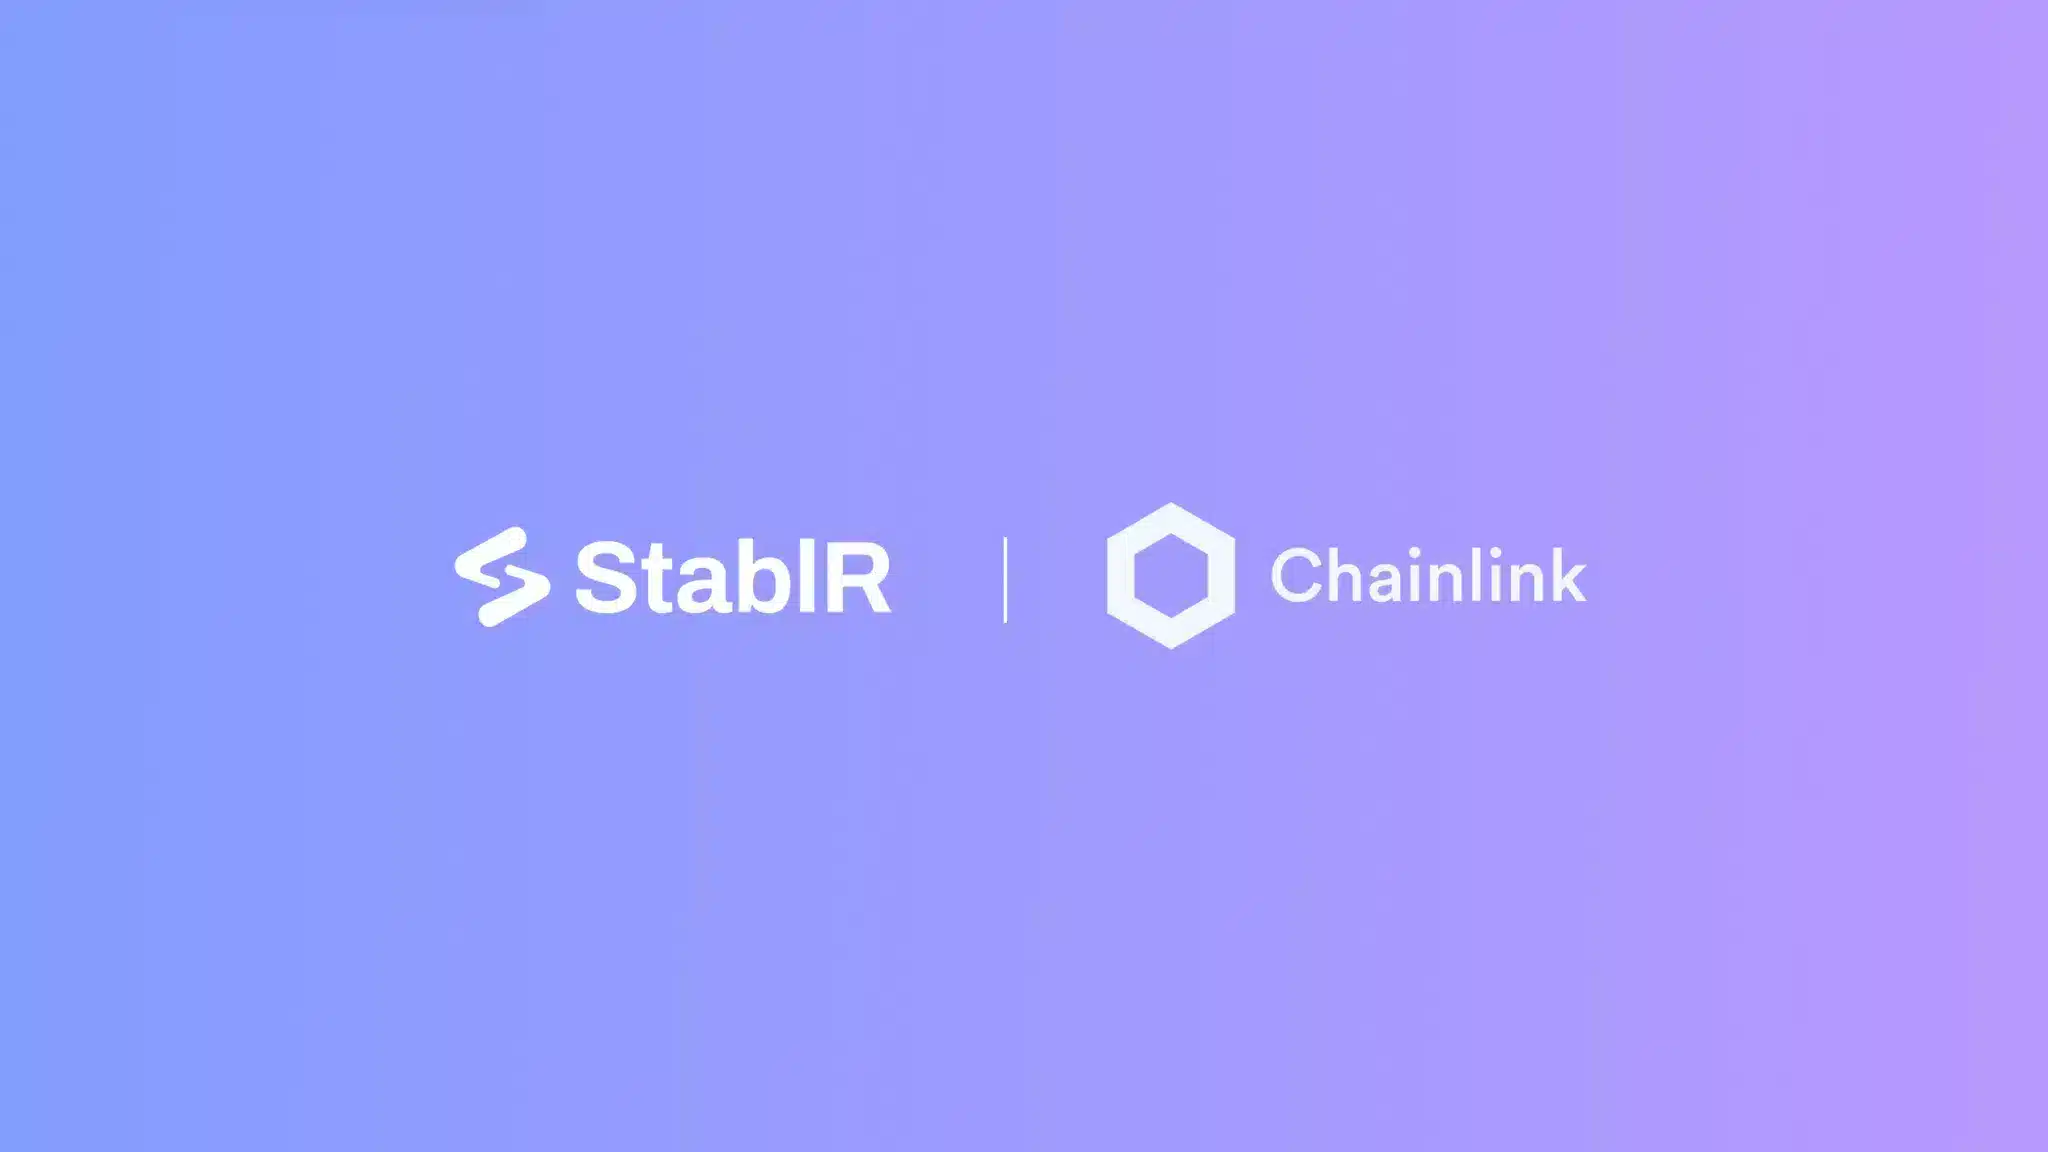 Chainlink’s Proof of Reserve Now Powers StablR’s EURR Stablecoin on Ethereum for Increased Transparency